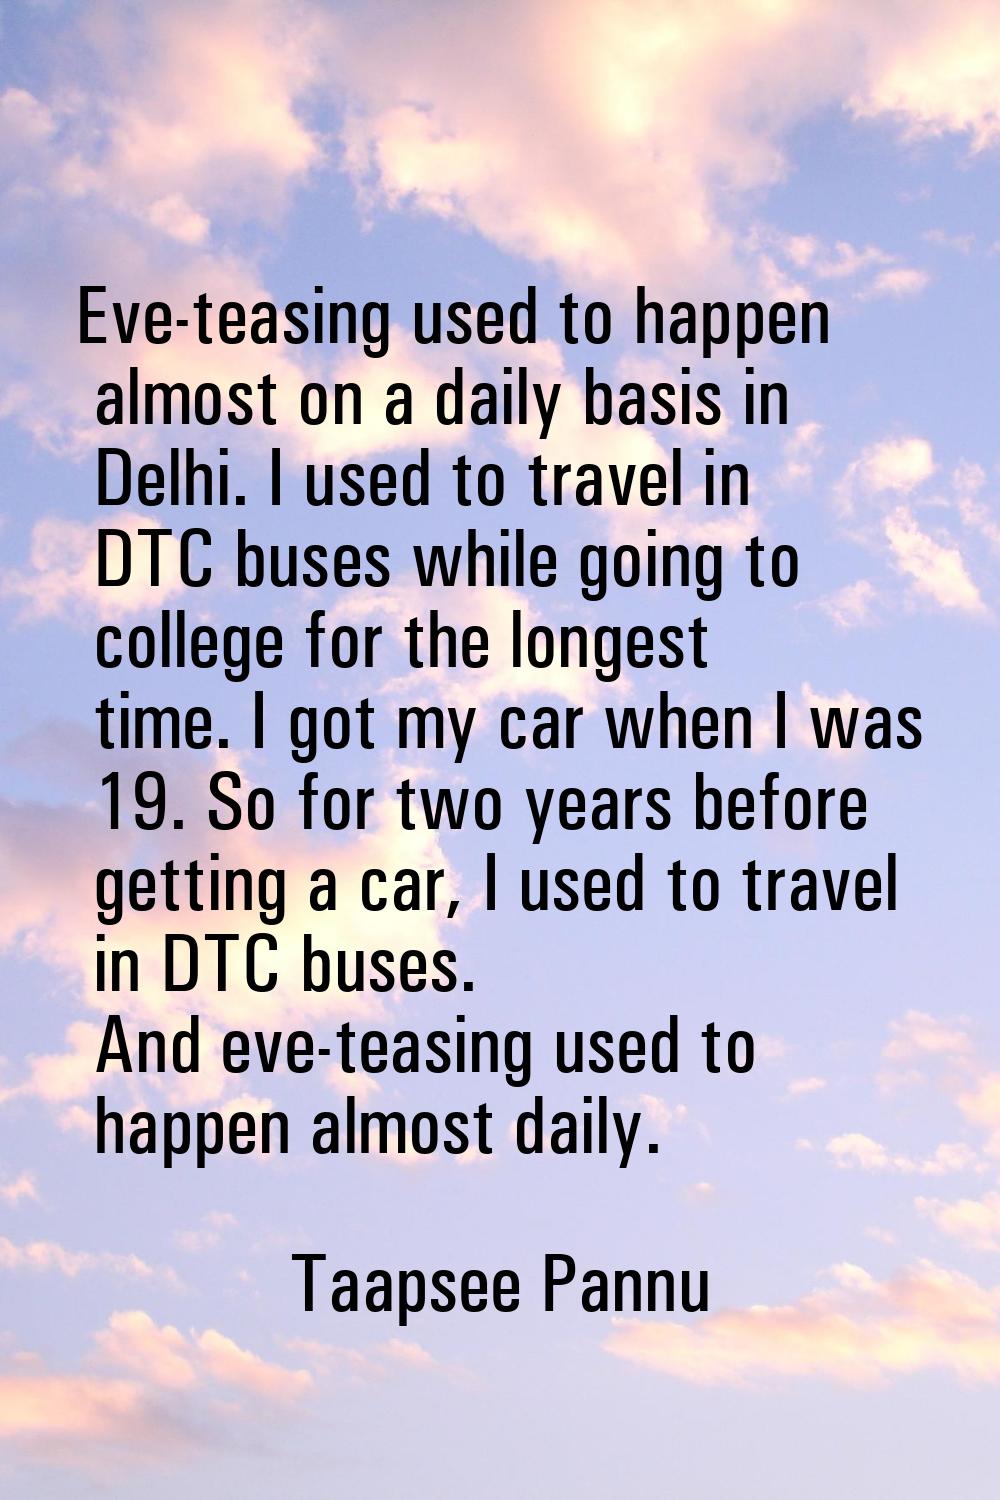 Eve-teasing used to happen almost on a daily basis in Delhi. I used to travel in DTC buses while go